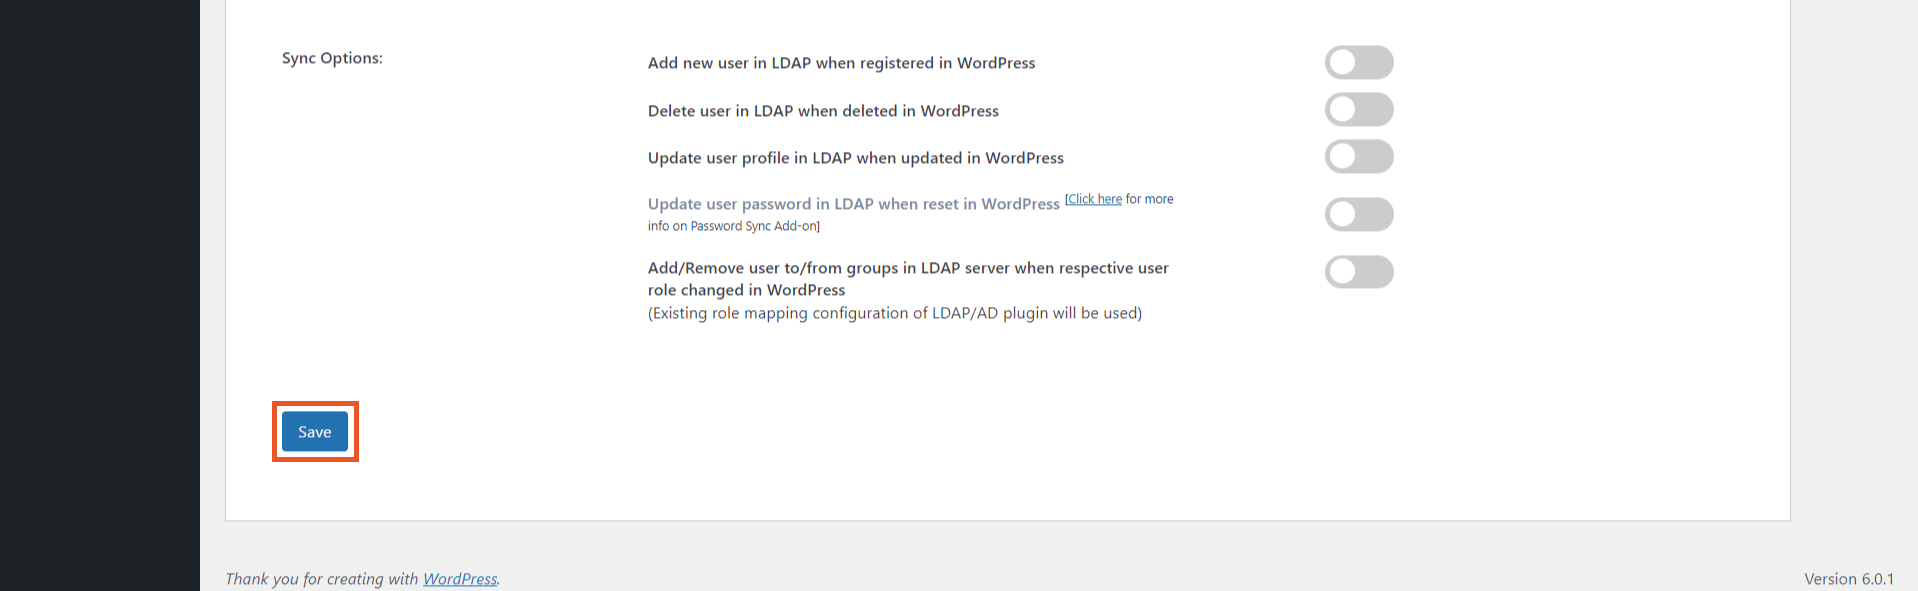 Directory Sync configure sync options for WordPress to LDAP